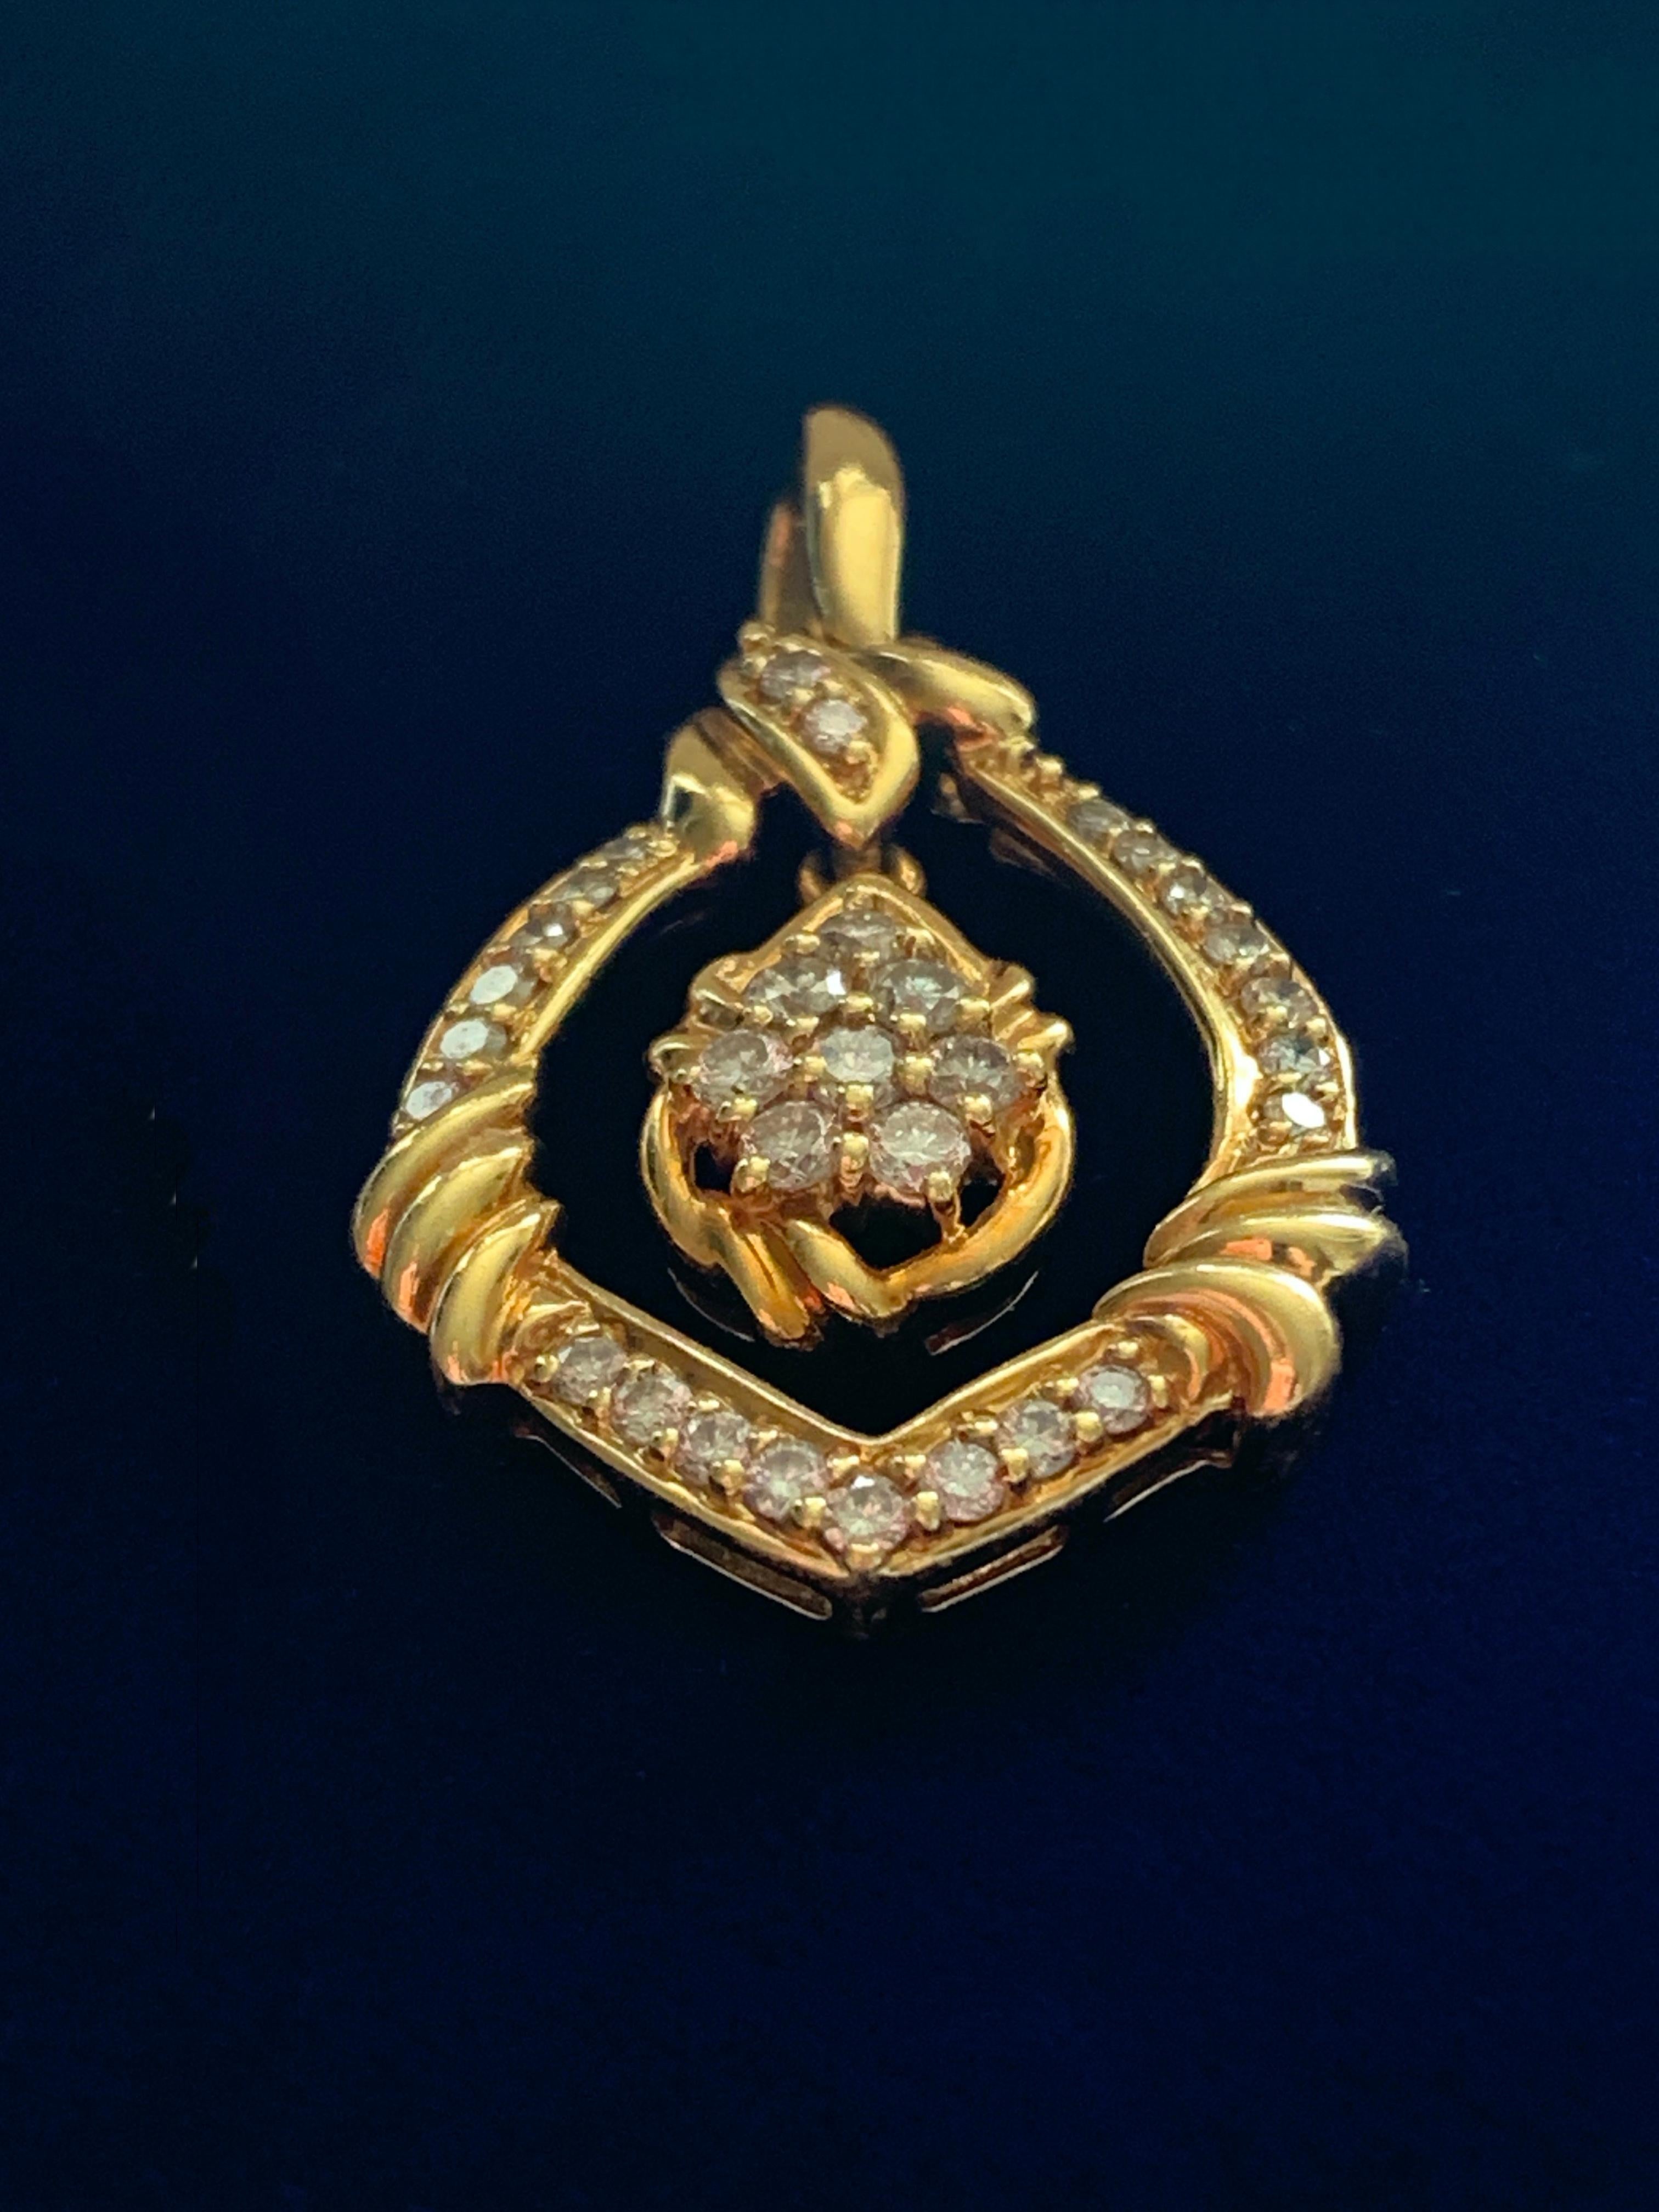 Beautiful 18ct Gold Diamond pendant 
Exquisite natural diamonds amounting to One Carat
Central section swings freely 
Stamped 18k  & 1.00 ( for diamond carat weight)
This pendant was photographed in daylight and twinkle as if under candle